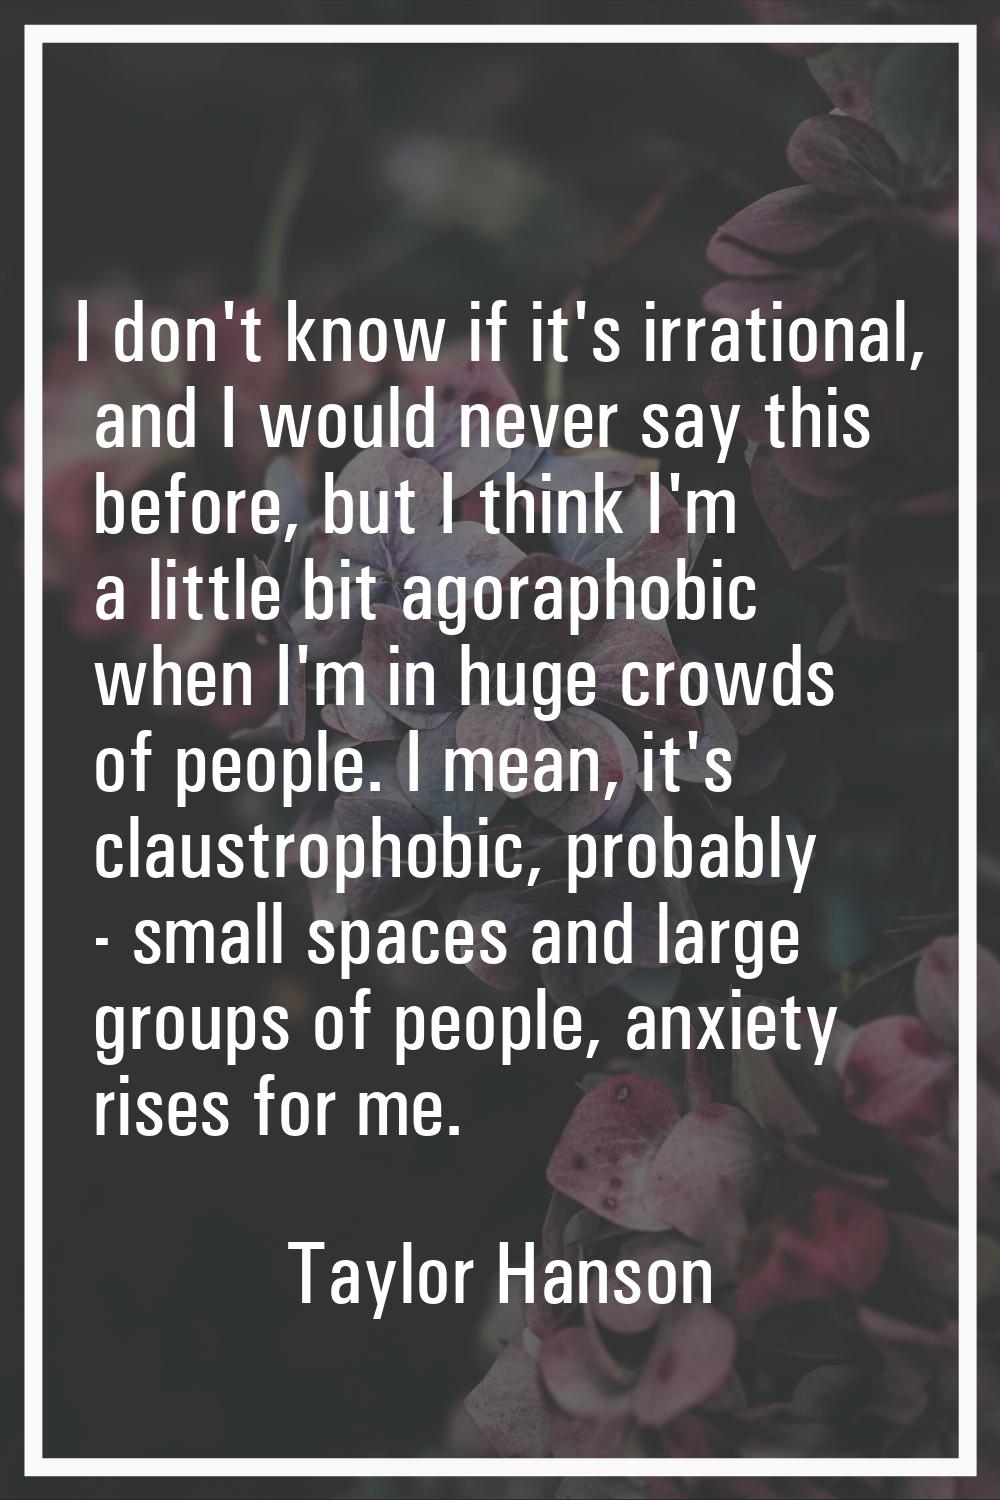 I don't know if it's irrational, and I would never say this before, but I think I'm a little bit ag